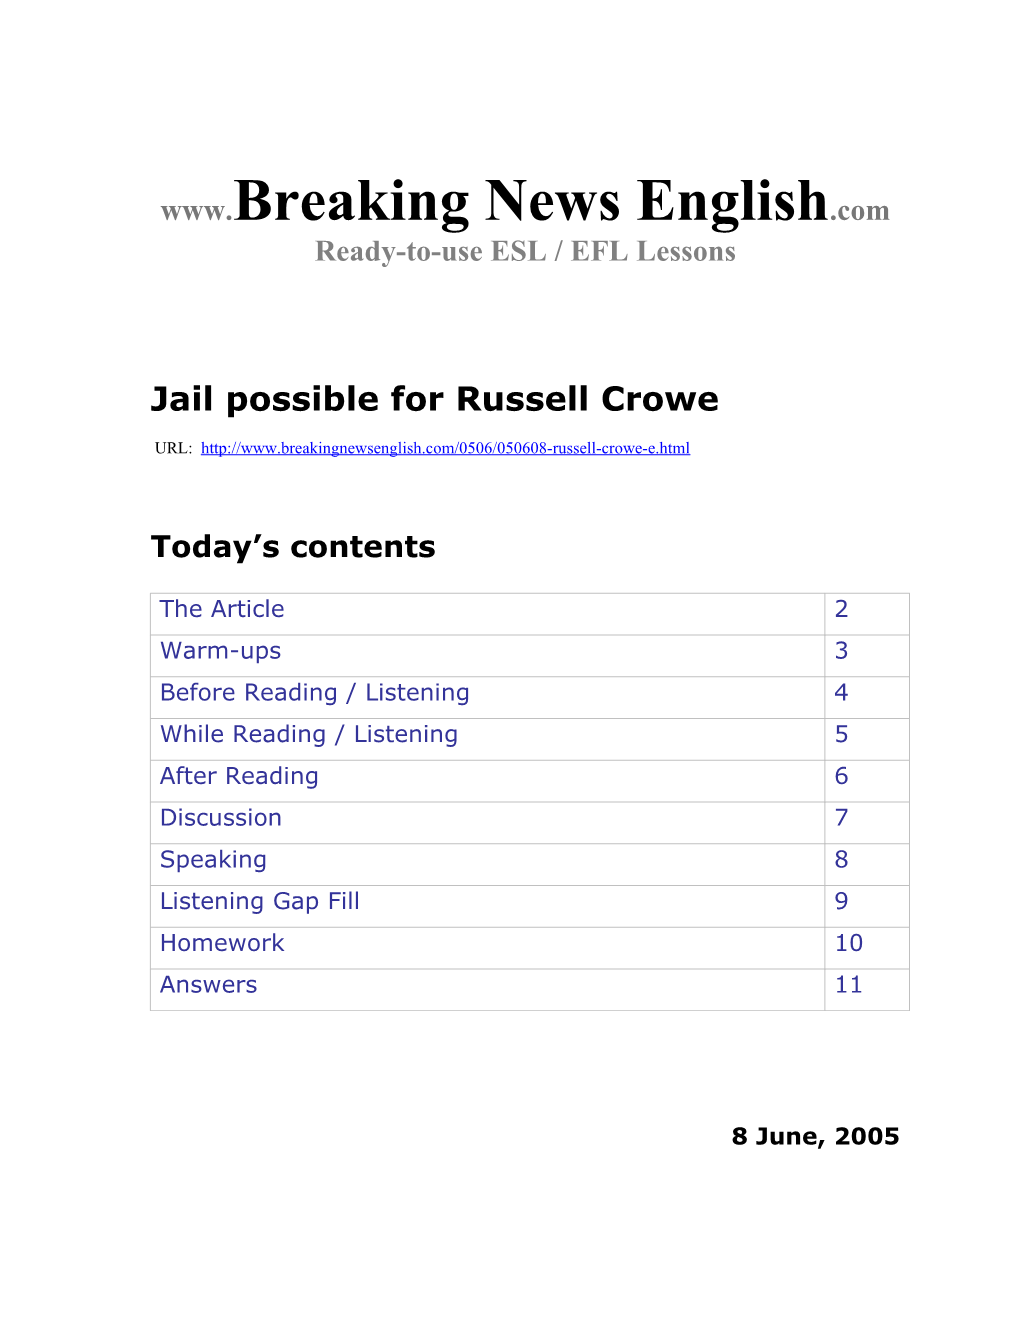 Jail Possible for Russell Crowe